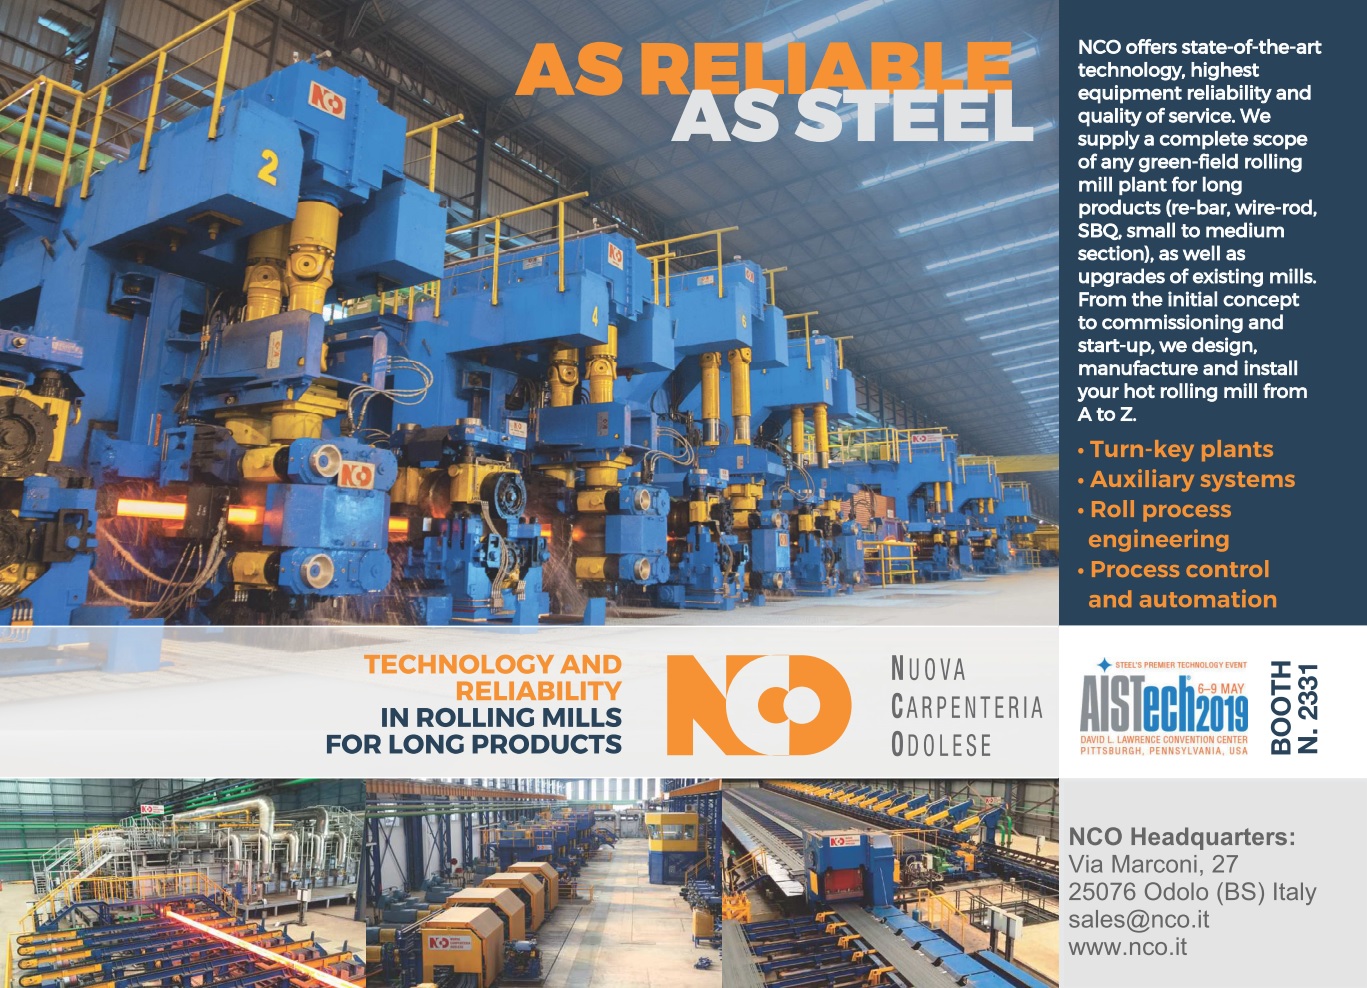 NCO Rolling Mills and the North American market